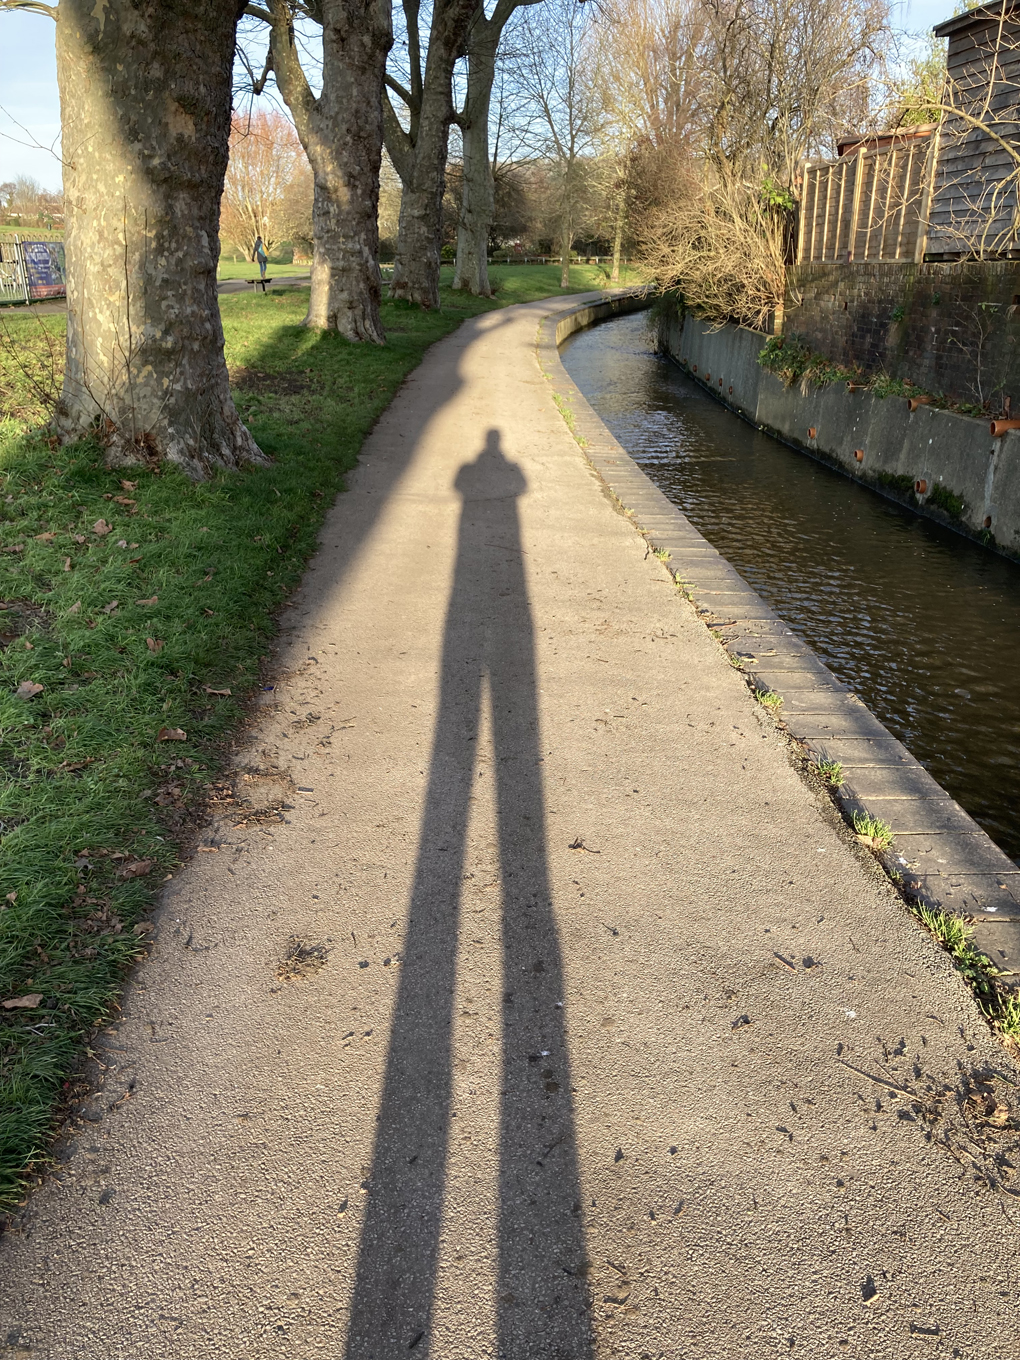 We see an elongated shadow of a man on a path framed by trees and a brook